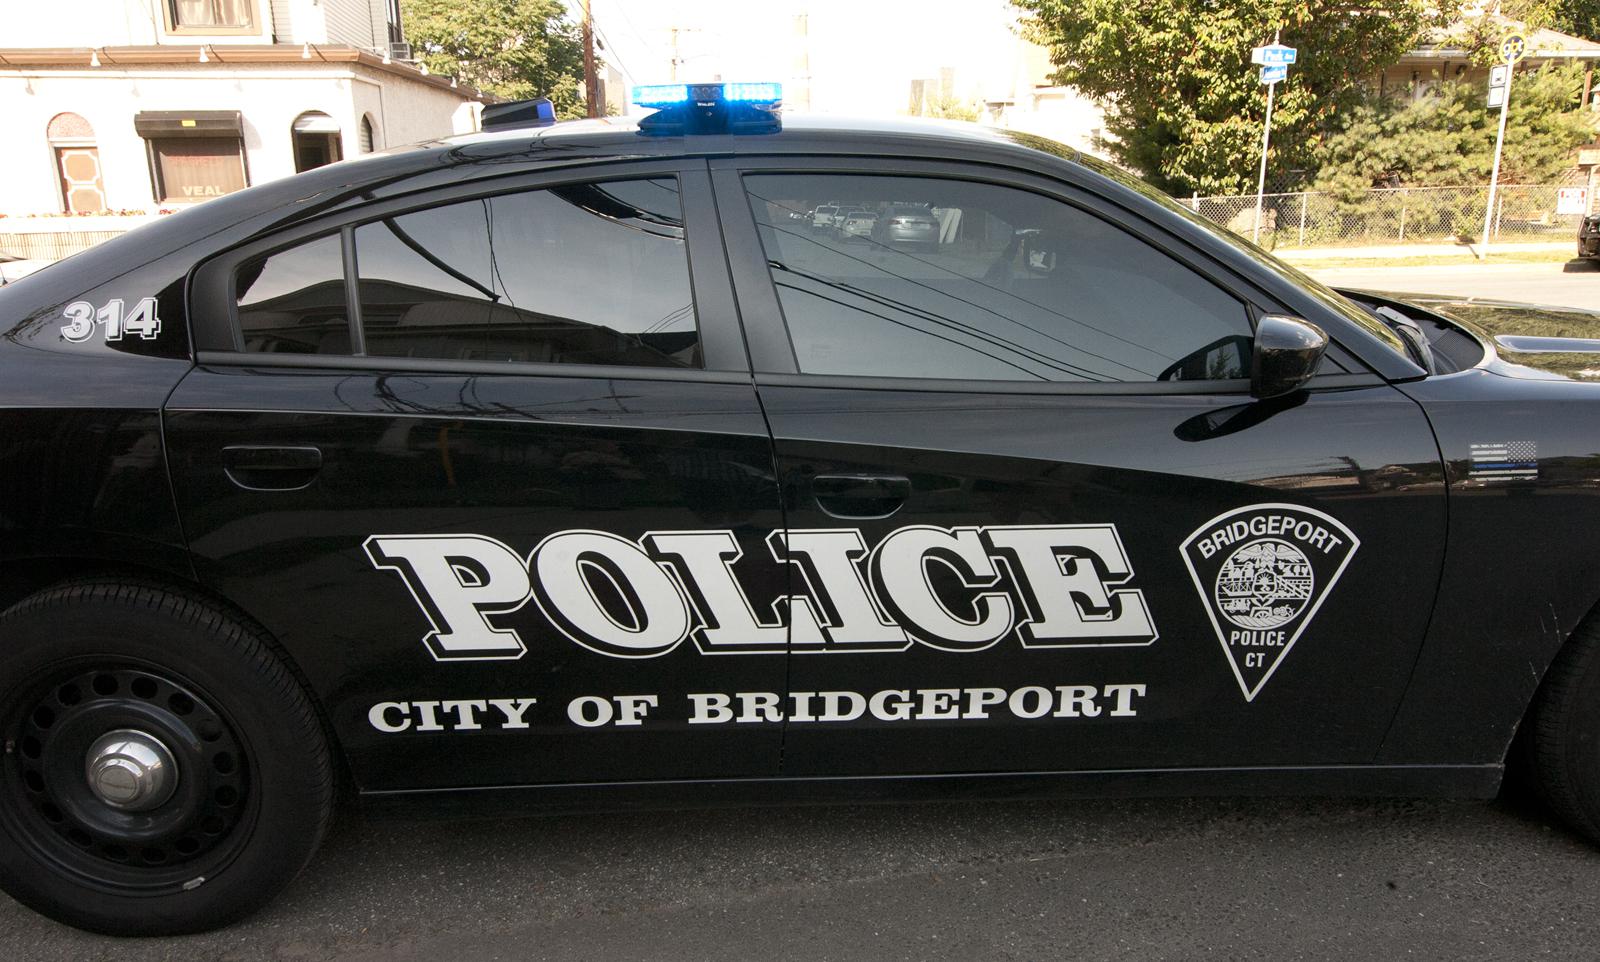 Official: ‘Persons of interest’ detained after Bridgeport shooting